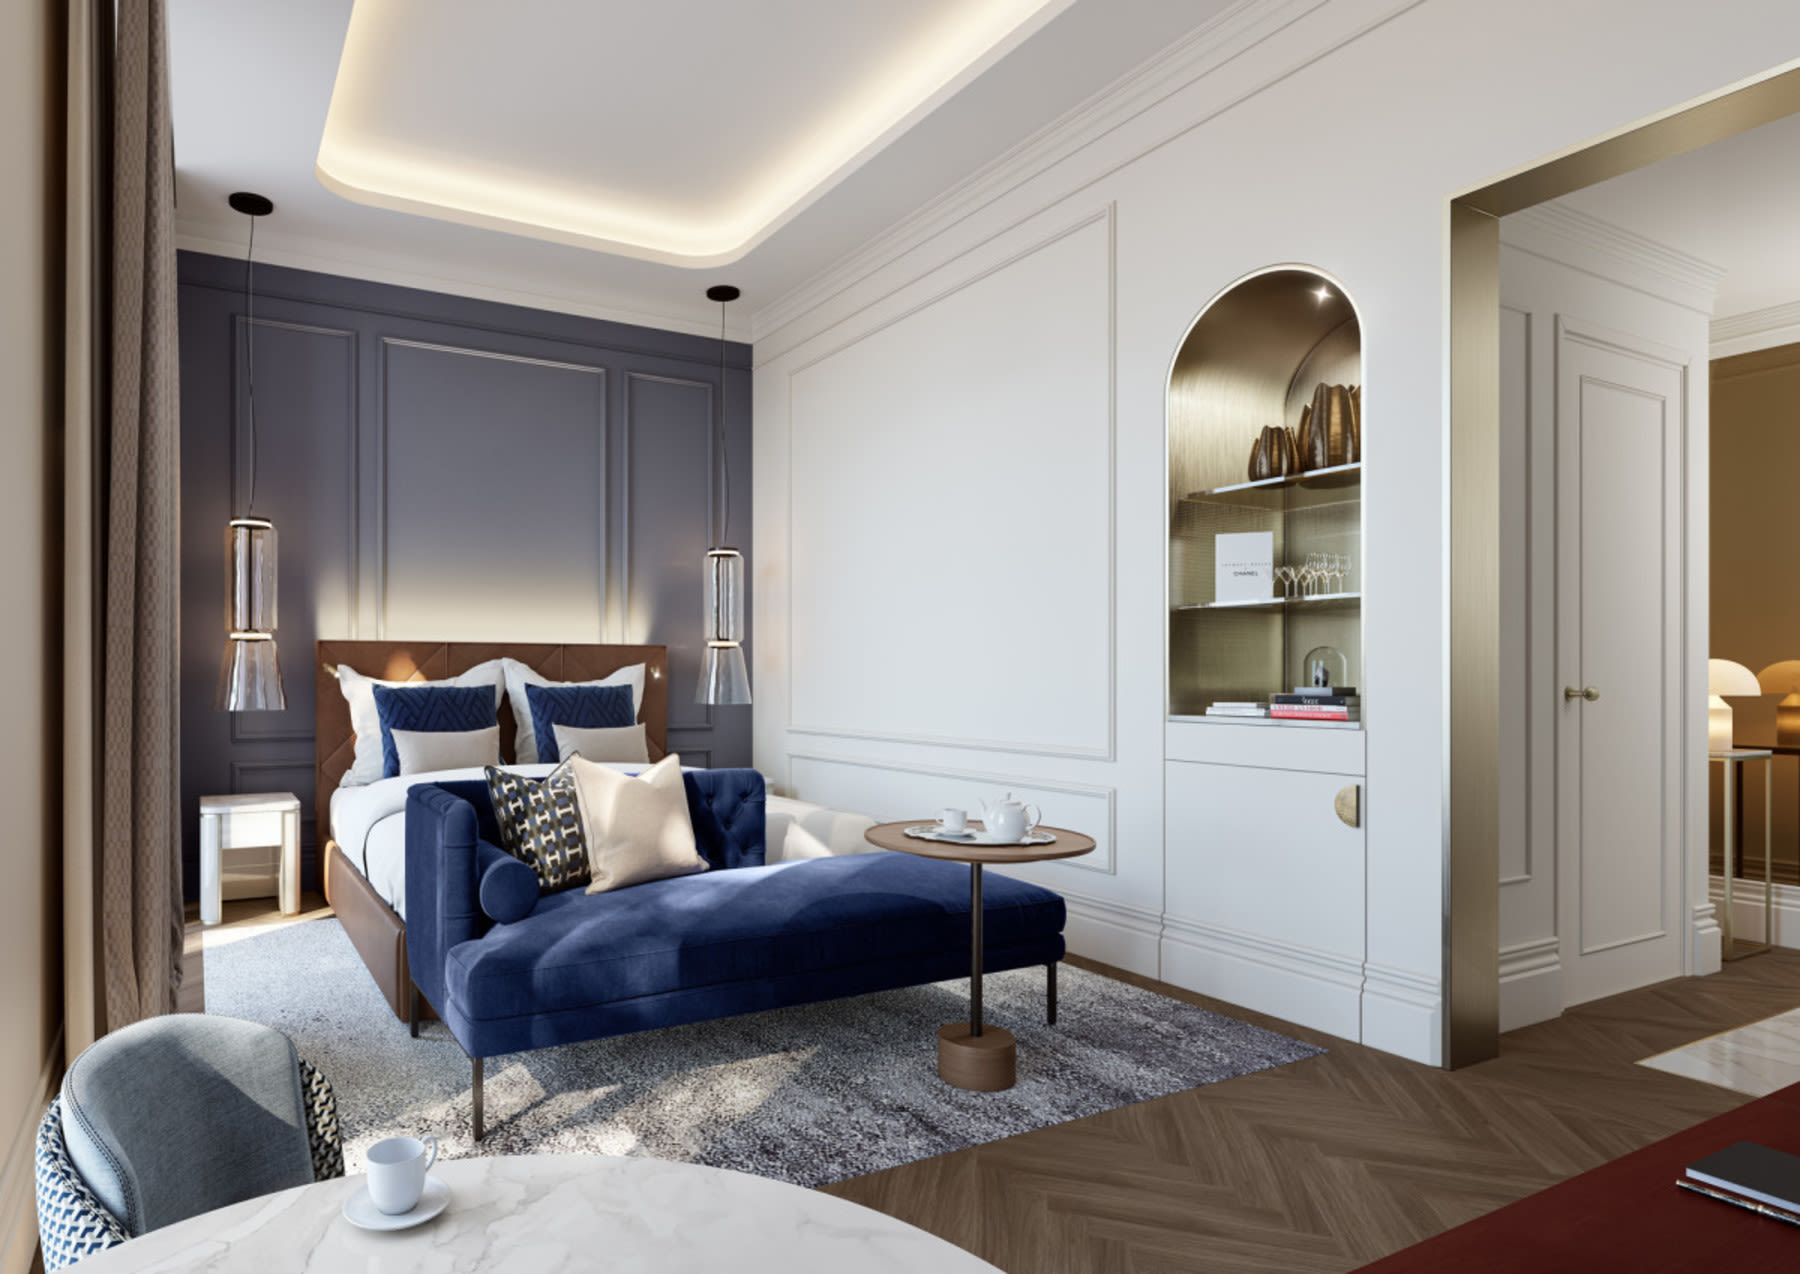 The Deluxe Suite is sophisticated and refined, featuring contemporary twists on classical Roman architectural devices such as arches, inlaid gold, and detailed cornices 